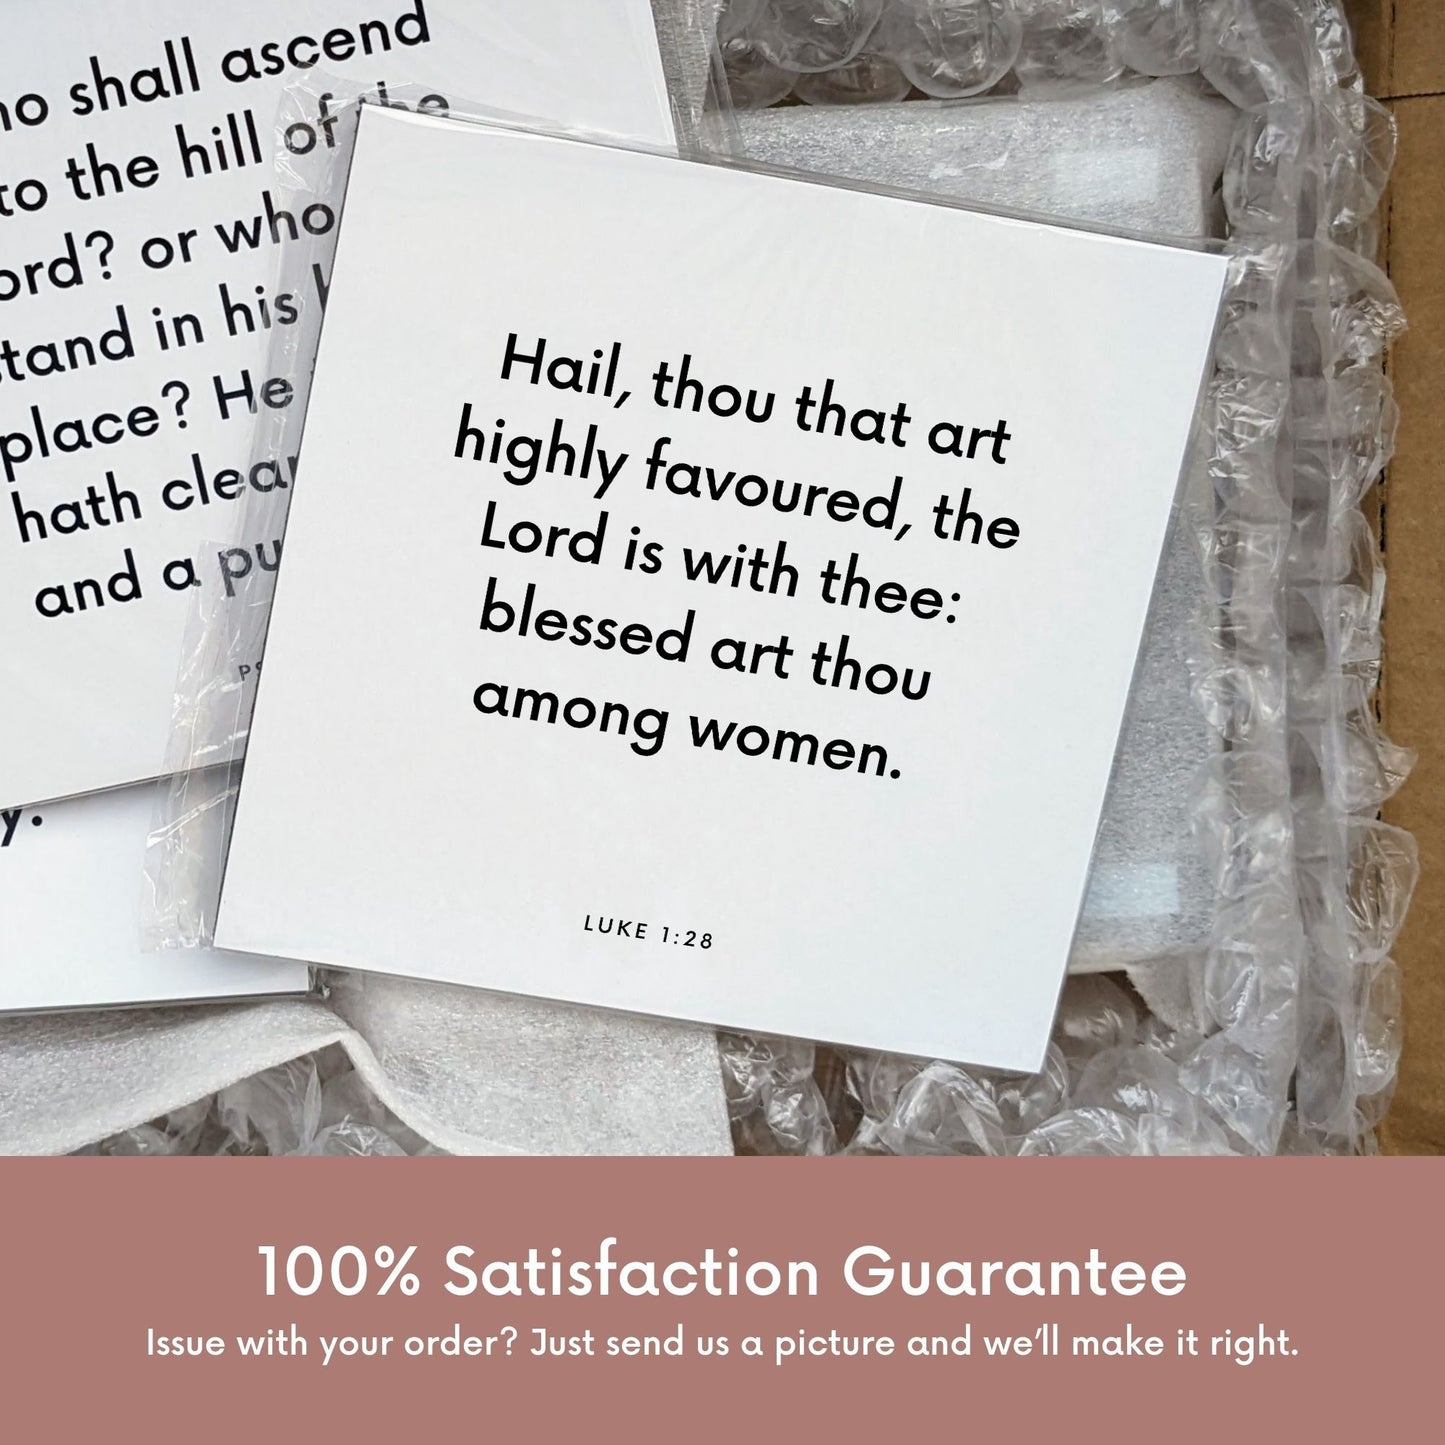 Shipping materials for scripture tile of Luke 1:28 - "Hail, thou that art highly favoured"